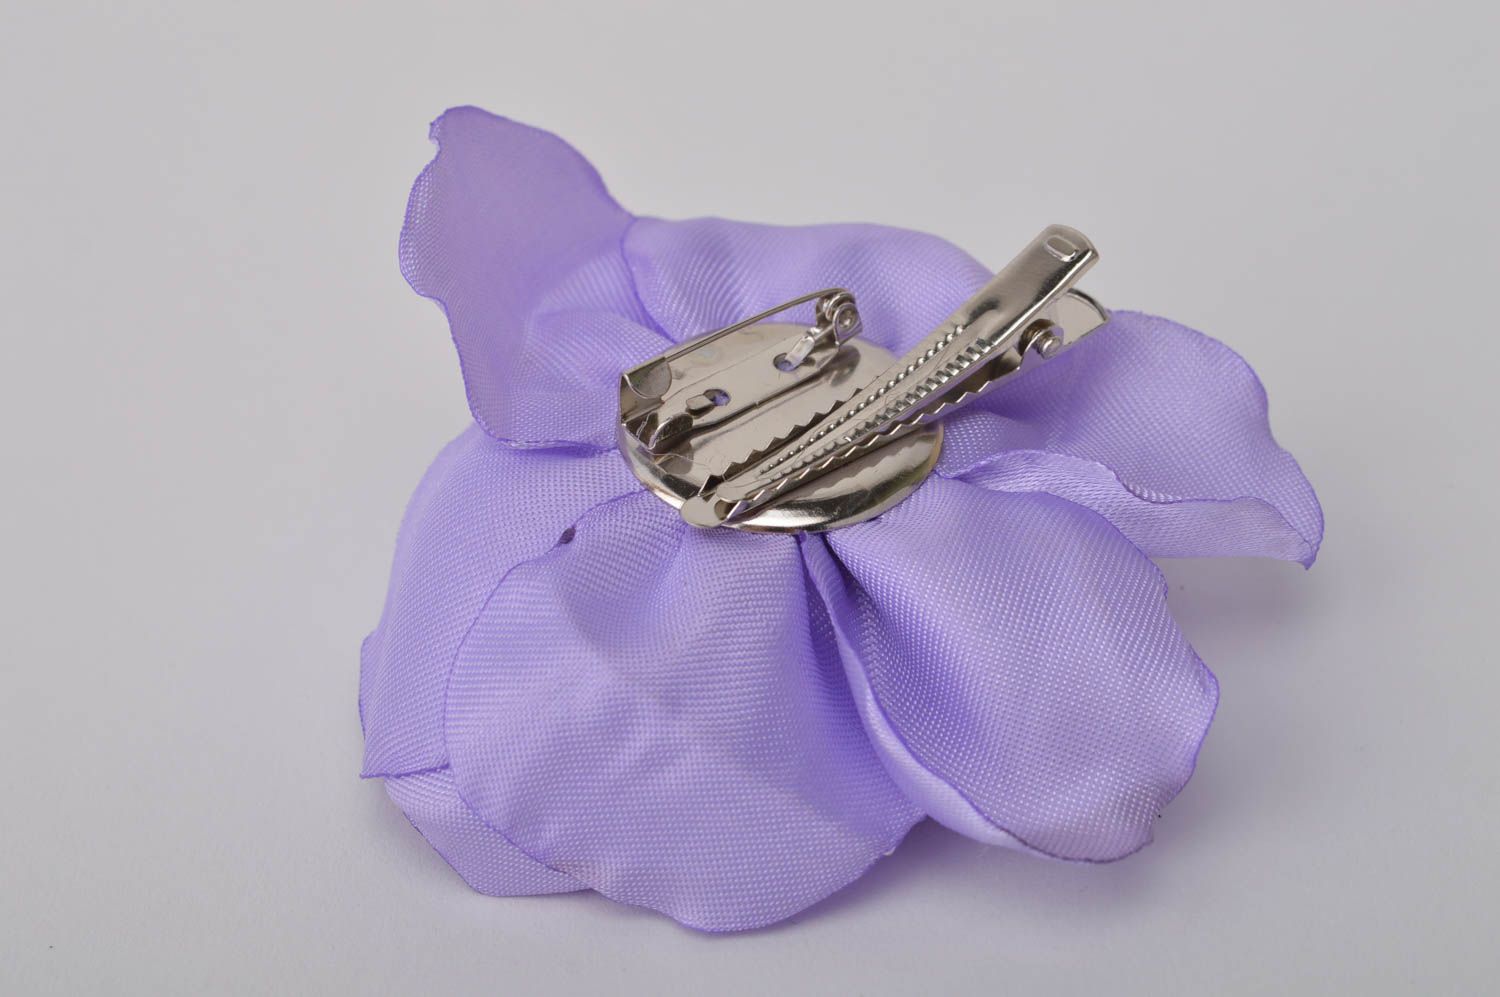 Beautiful handmade flower brooch homemade barrette hair clip gifts for her photo 5